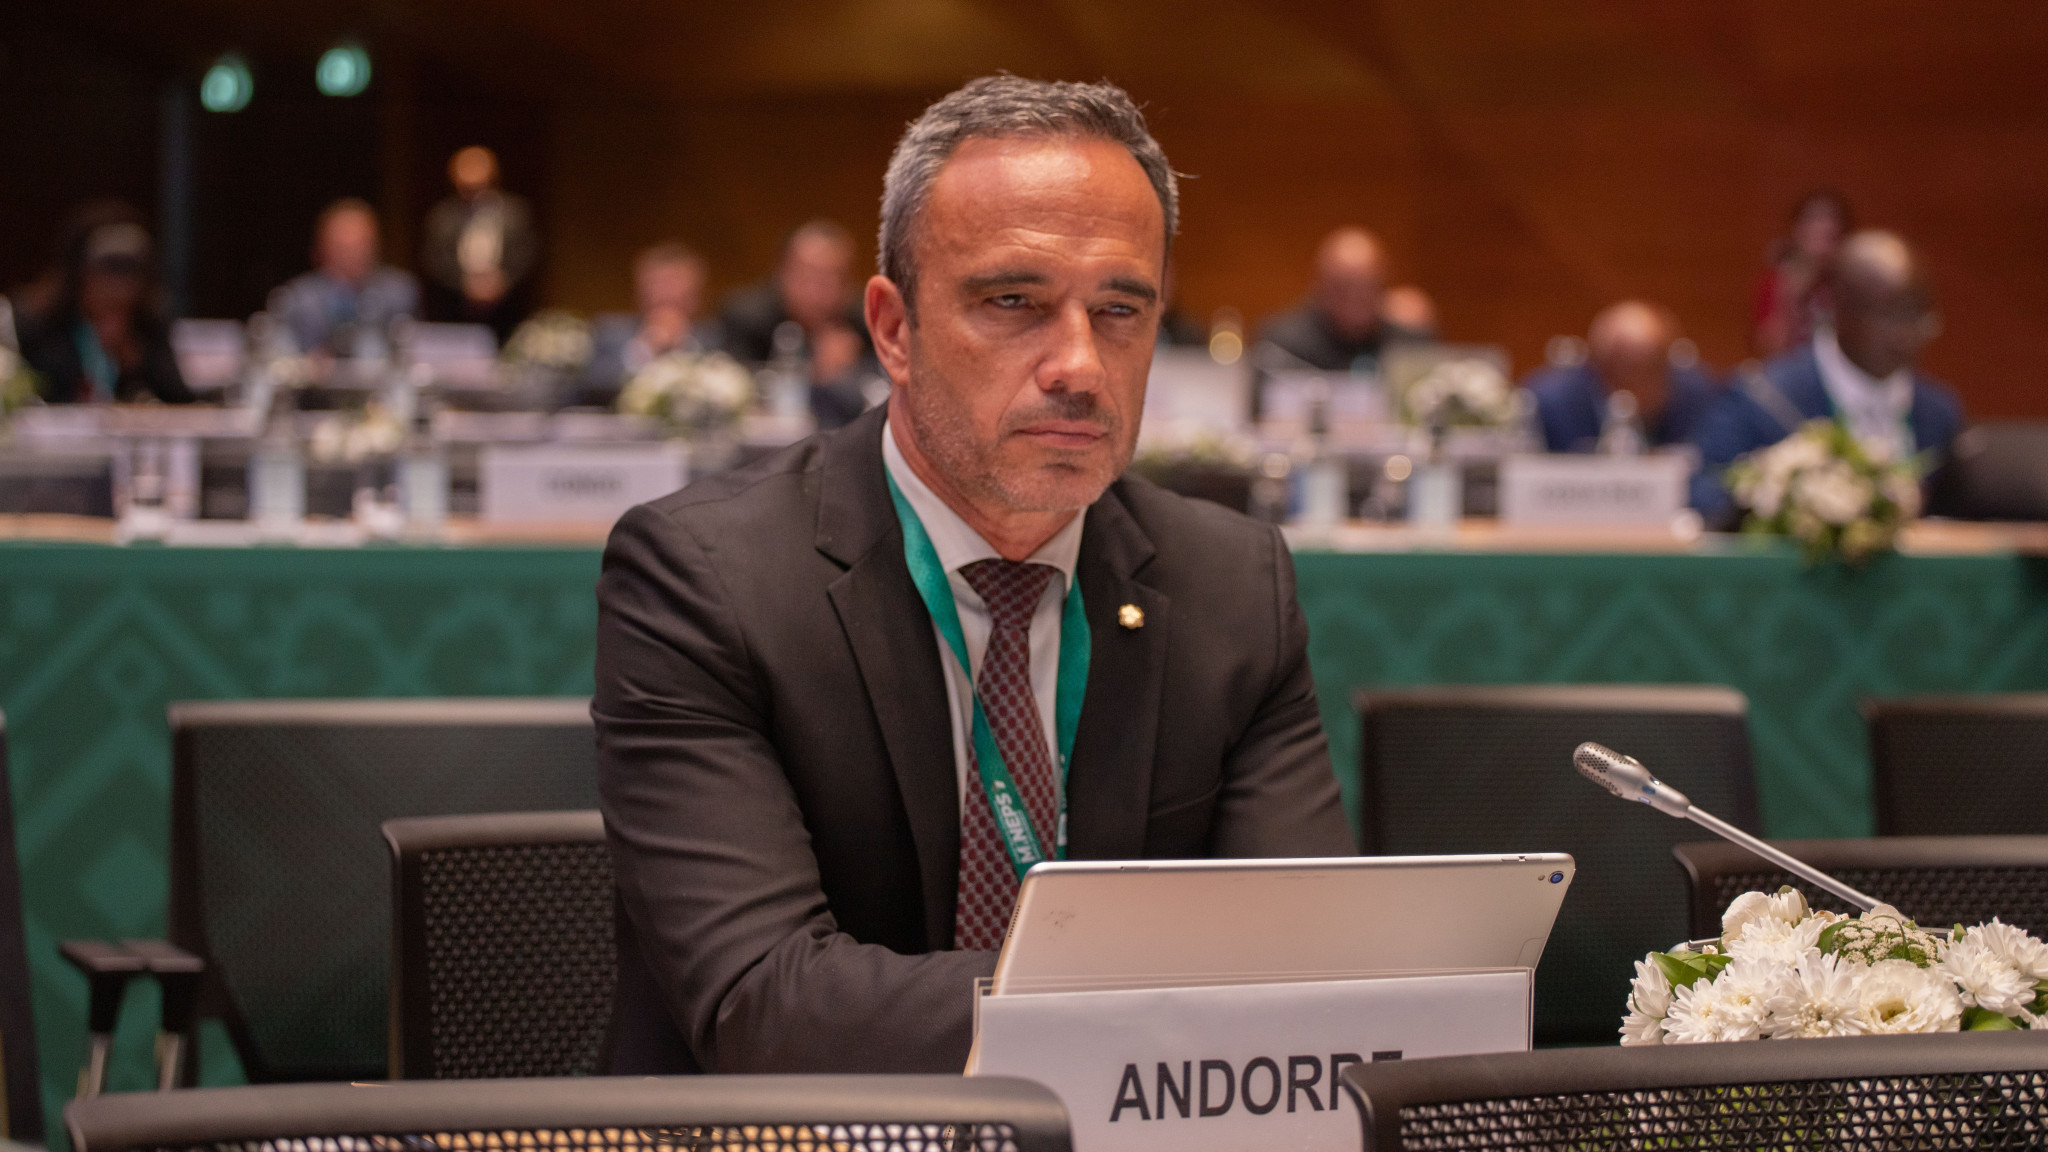 Andorra’s State Secretary for Youth and Sport Alian Cabanes Galian read out the statement at MINEPS VII ©MINEPS VII